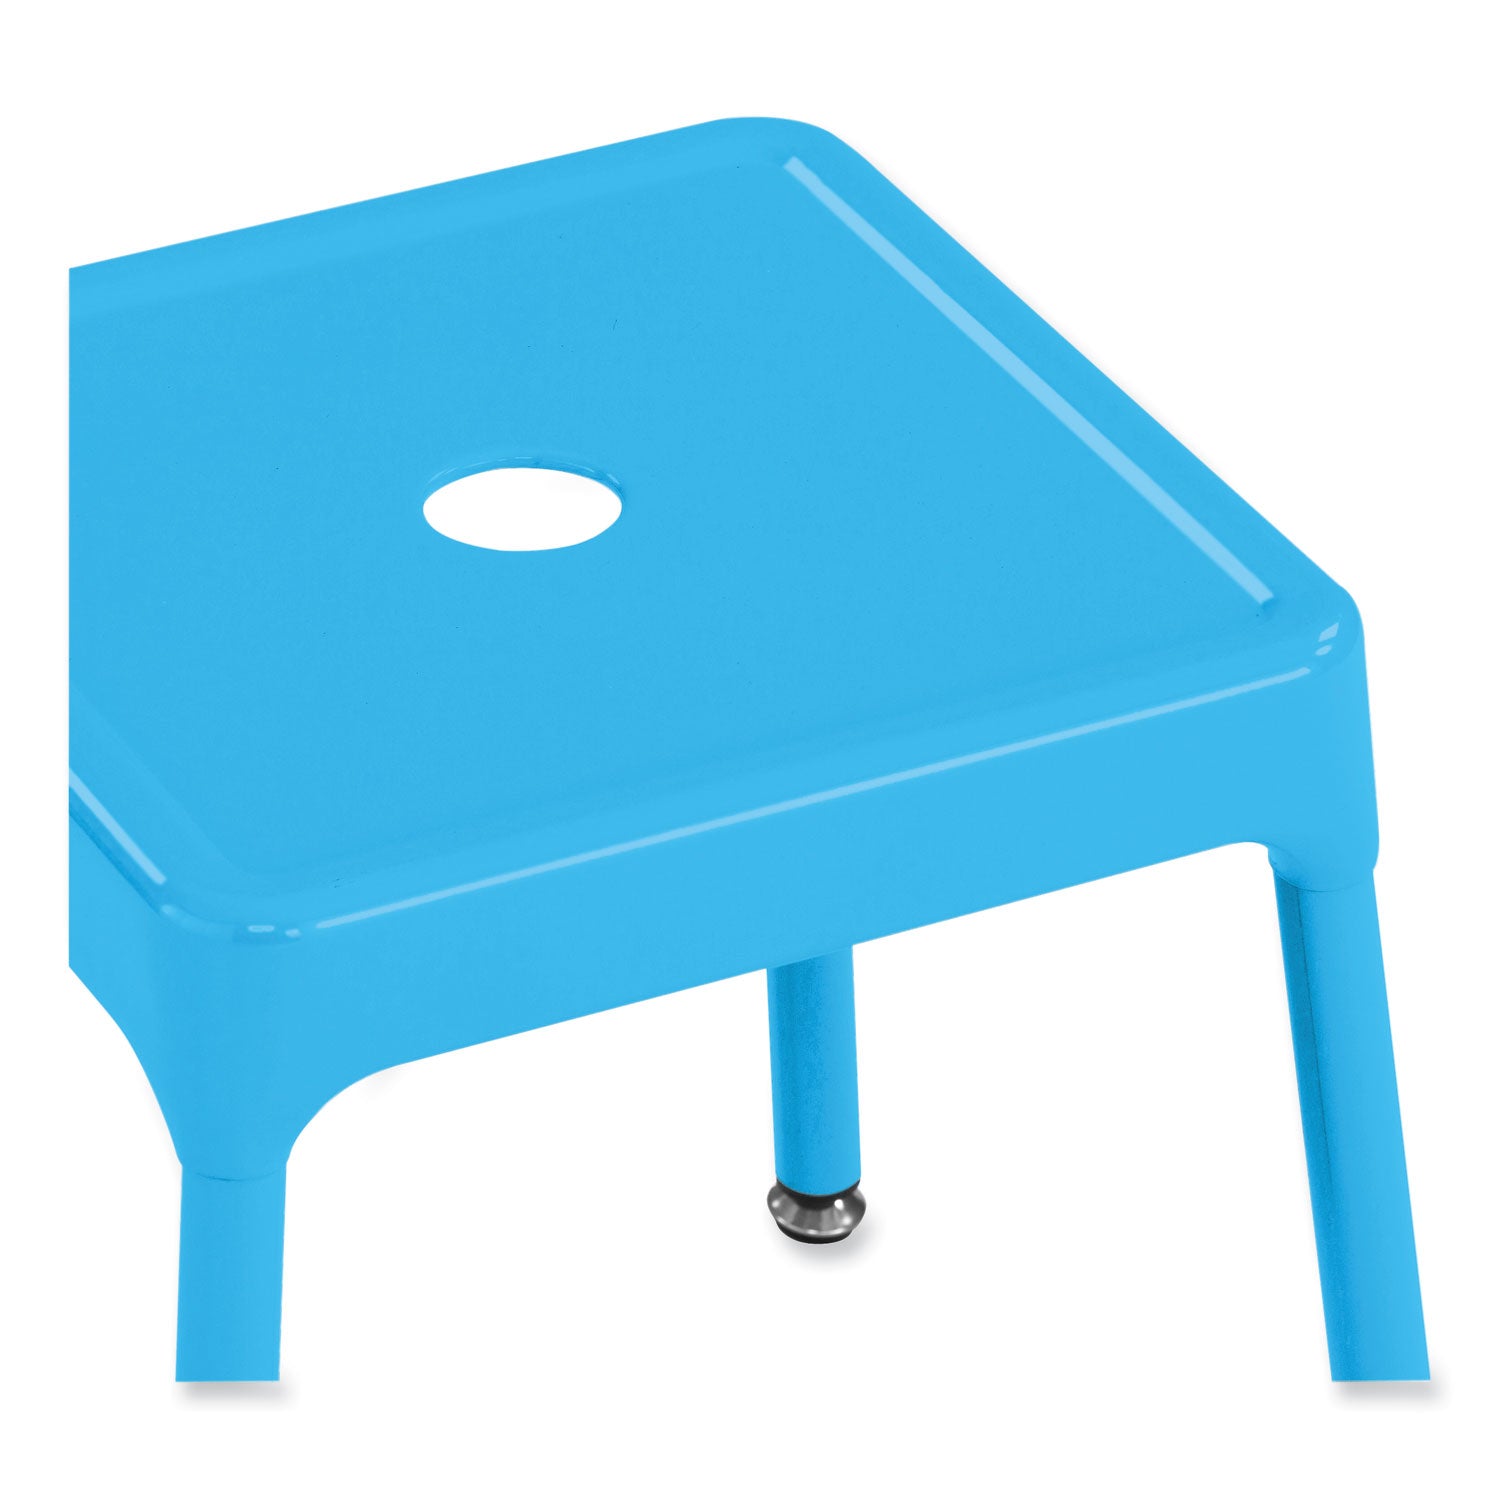 steel-bar-stool-backless-supports-up-to-275-lb-29-seat-height-babyblue-seat-babyblue-base-ships-in-1-3-business-days_saf6606bu - 3